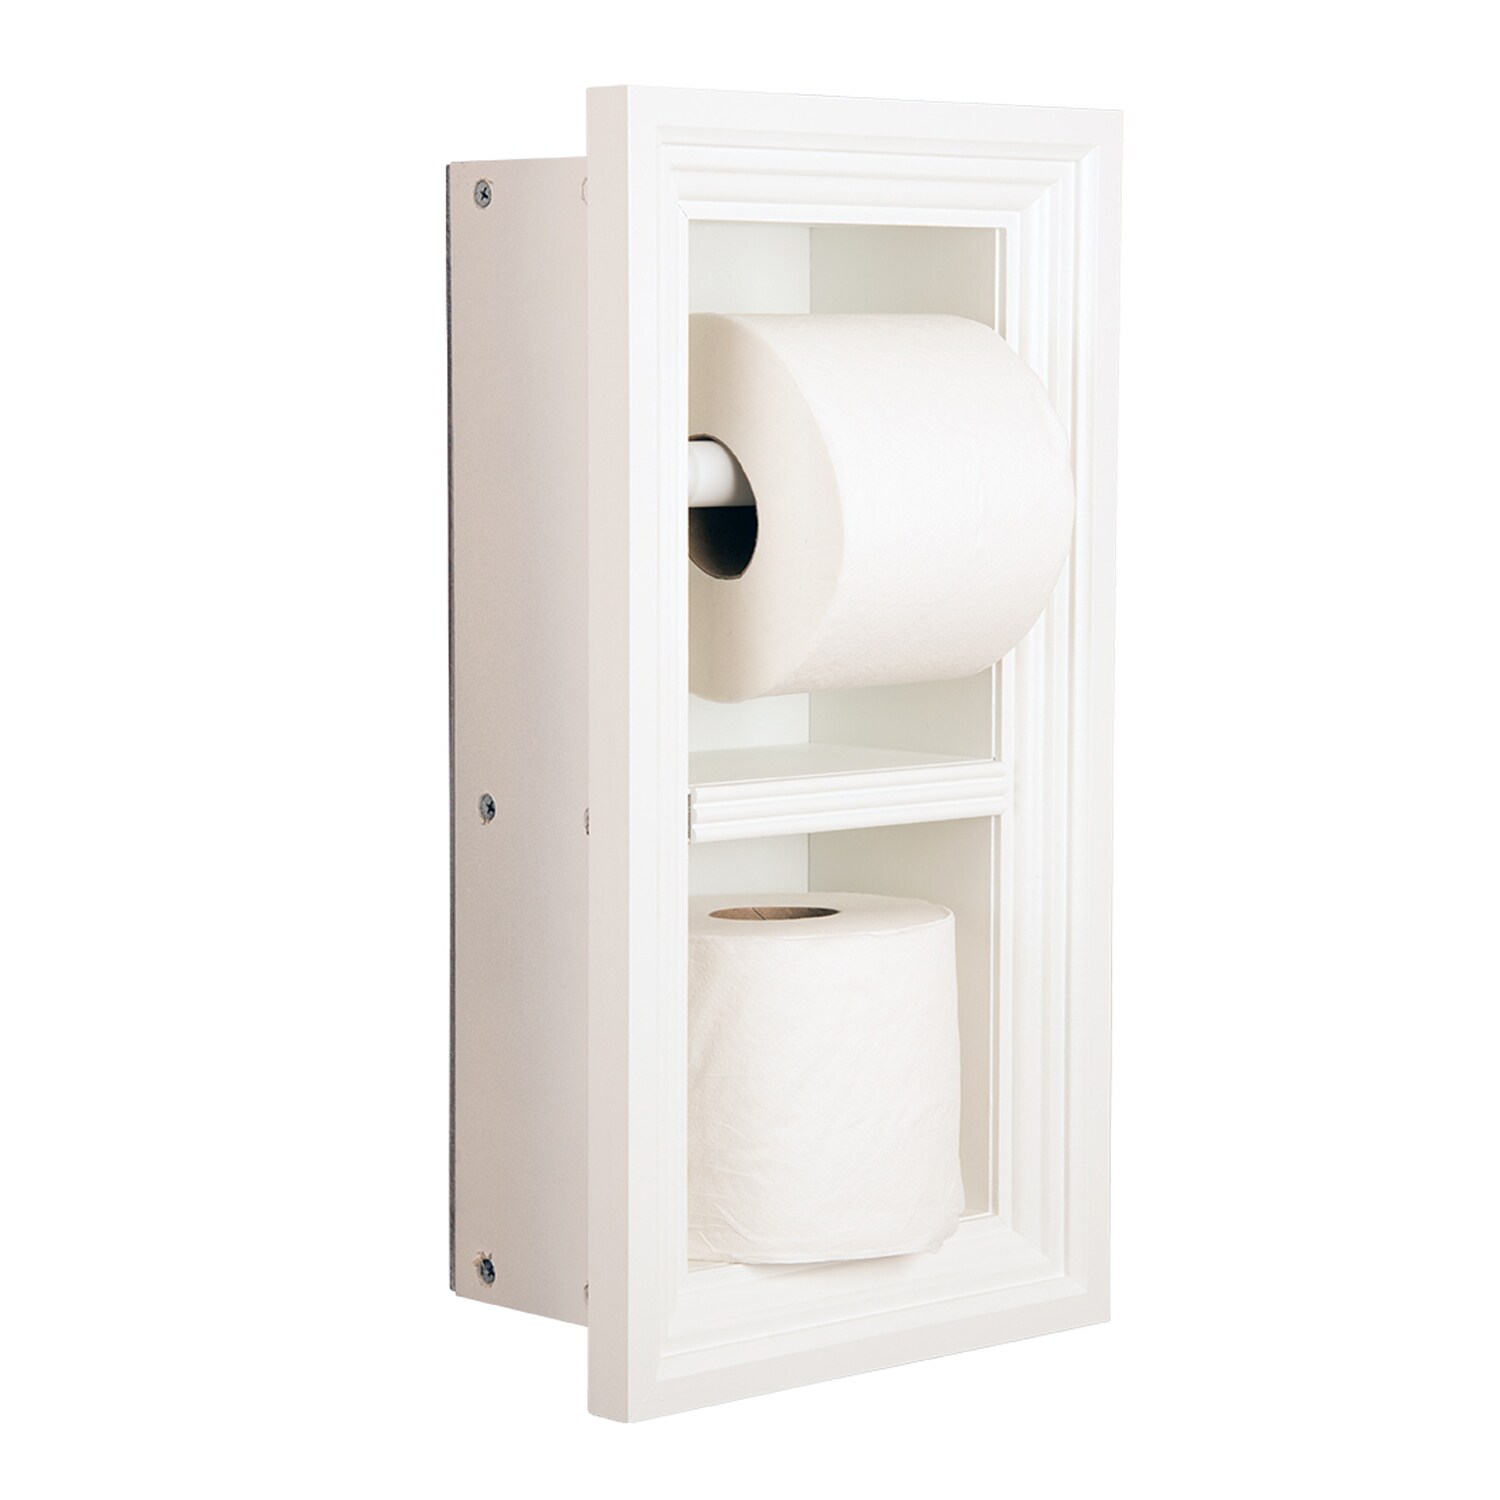 https://ak1.ostkcdn.com/images/products/16341067/Solid-Wood-Recessed-in-wall-Bathroom-Double-Toilet-Paper-Holder-Multiple-Finishes-ac1cce73-e245-4a9d-b1f4-f35771ad87cc.jpg